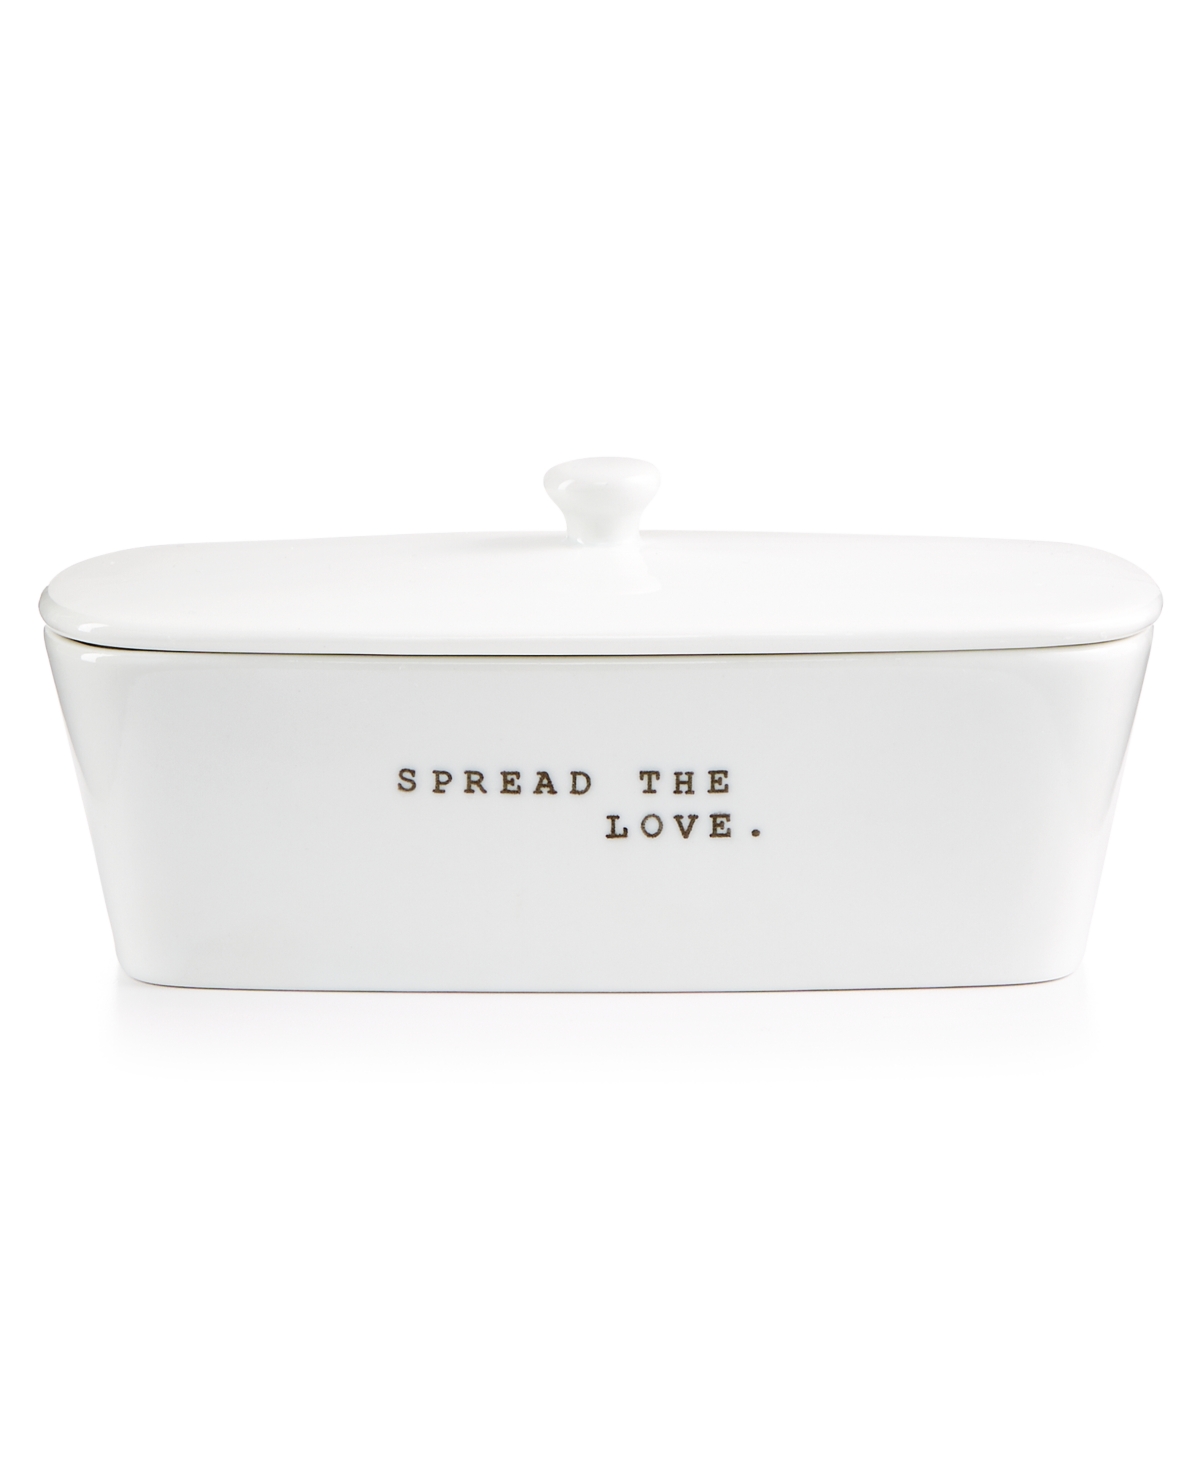 Whiteware Words Collection Spread the Love Covered Dish, Created for Macy's